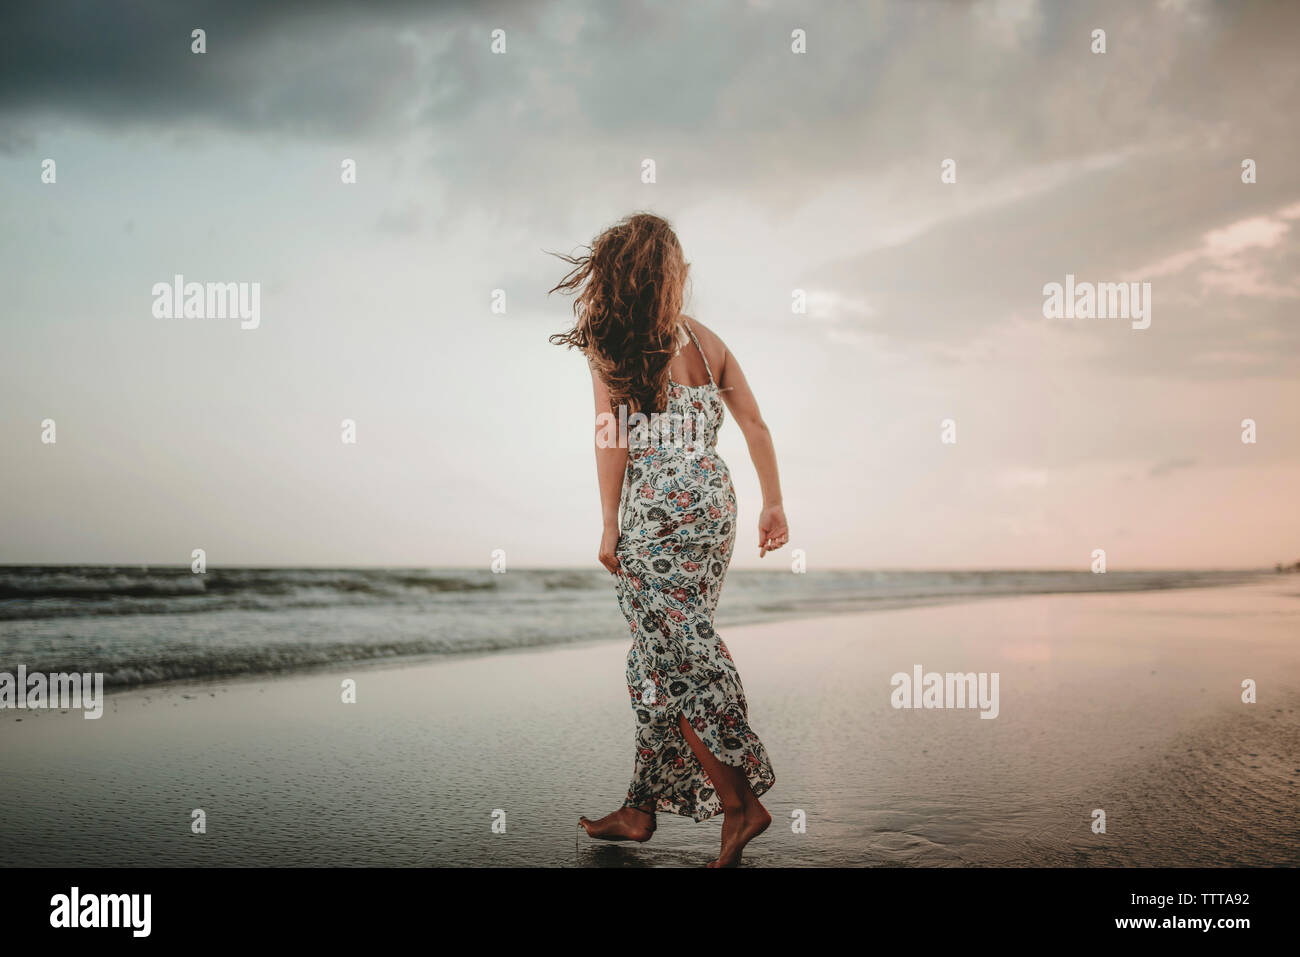 Rear view of woman walking at beach against sky during sunset Stock Photo